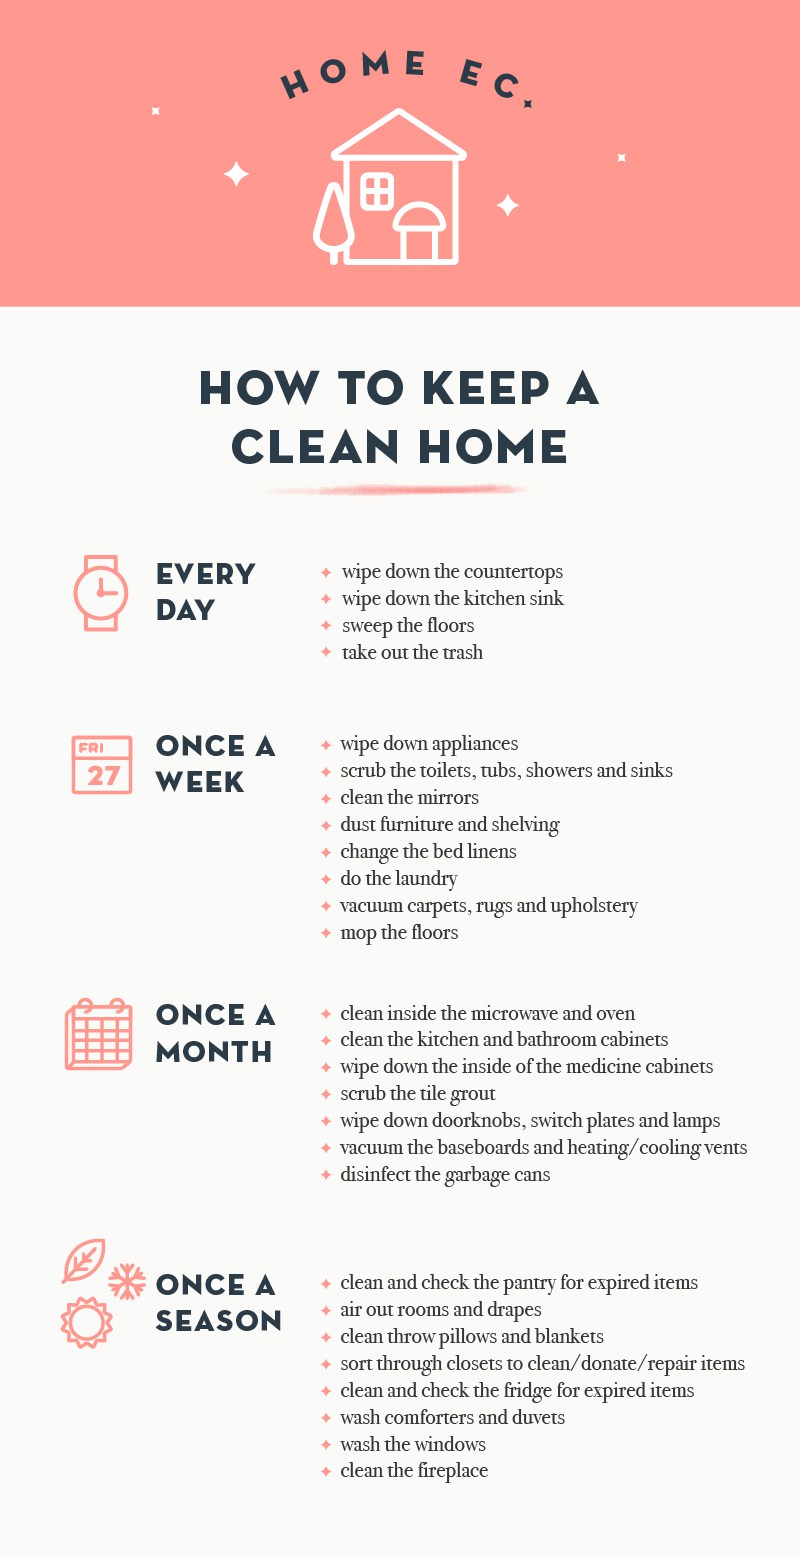 How to keep a home clean